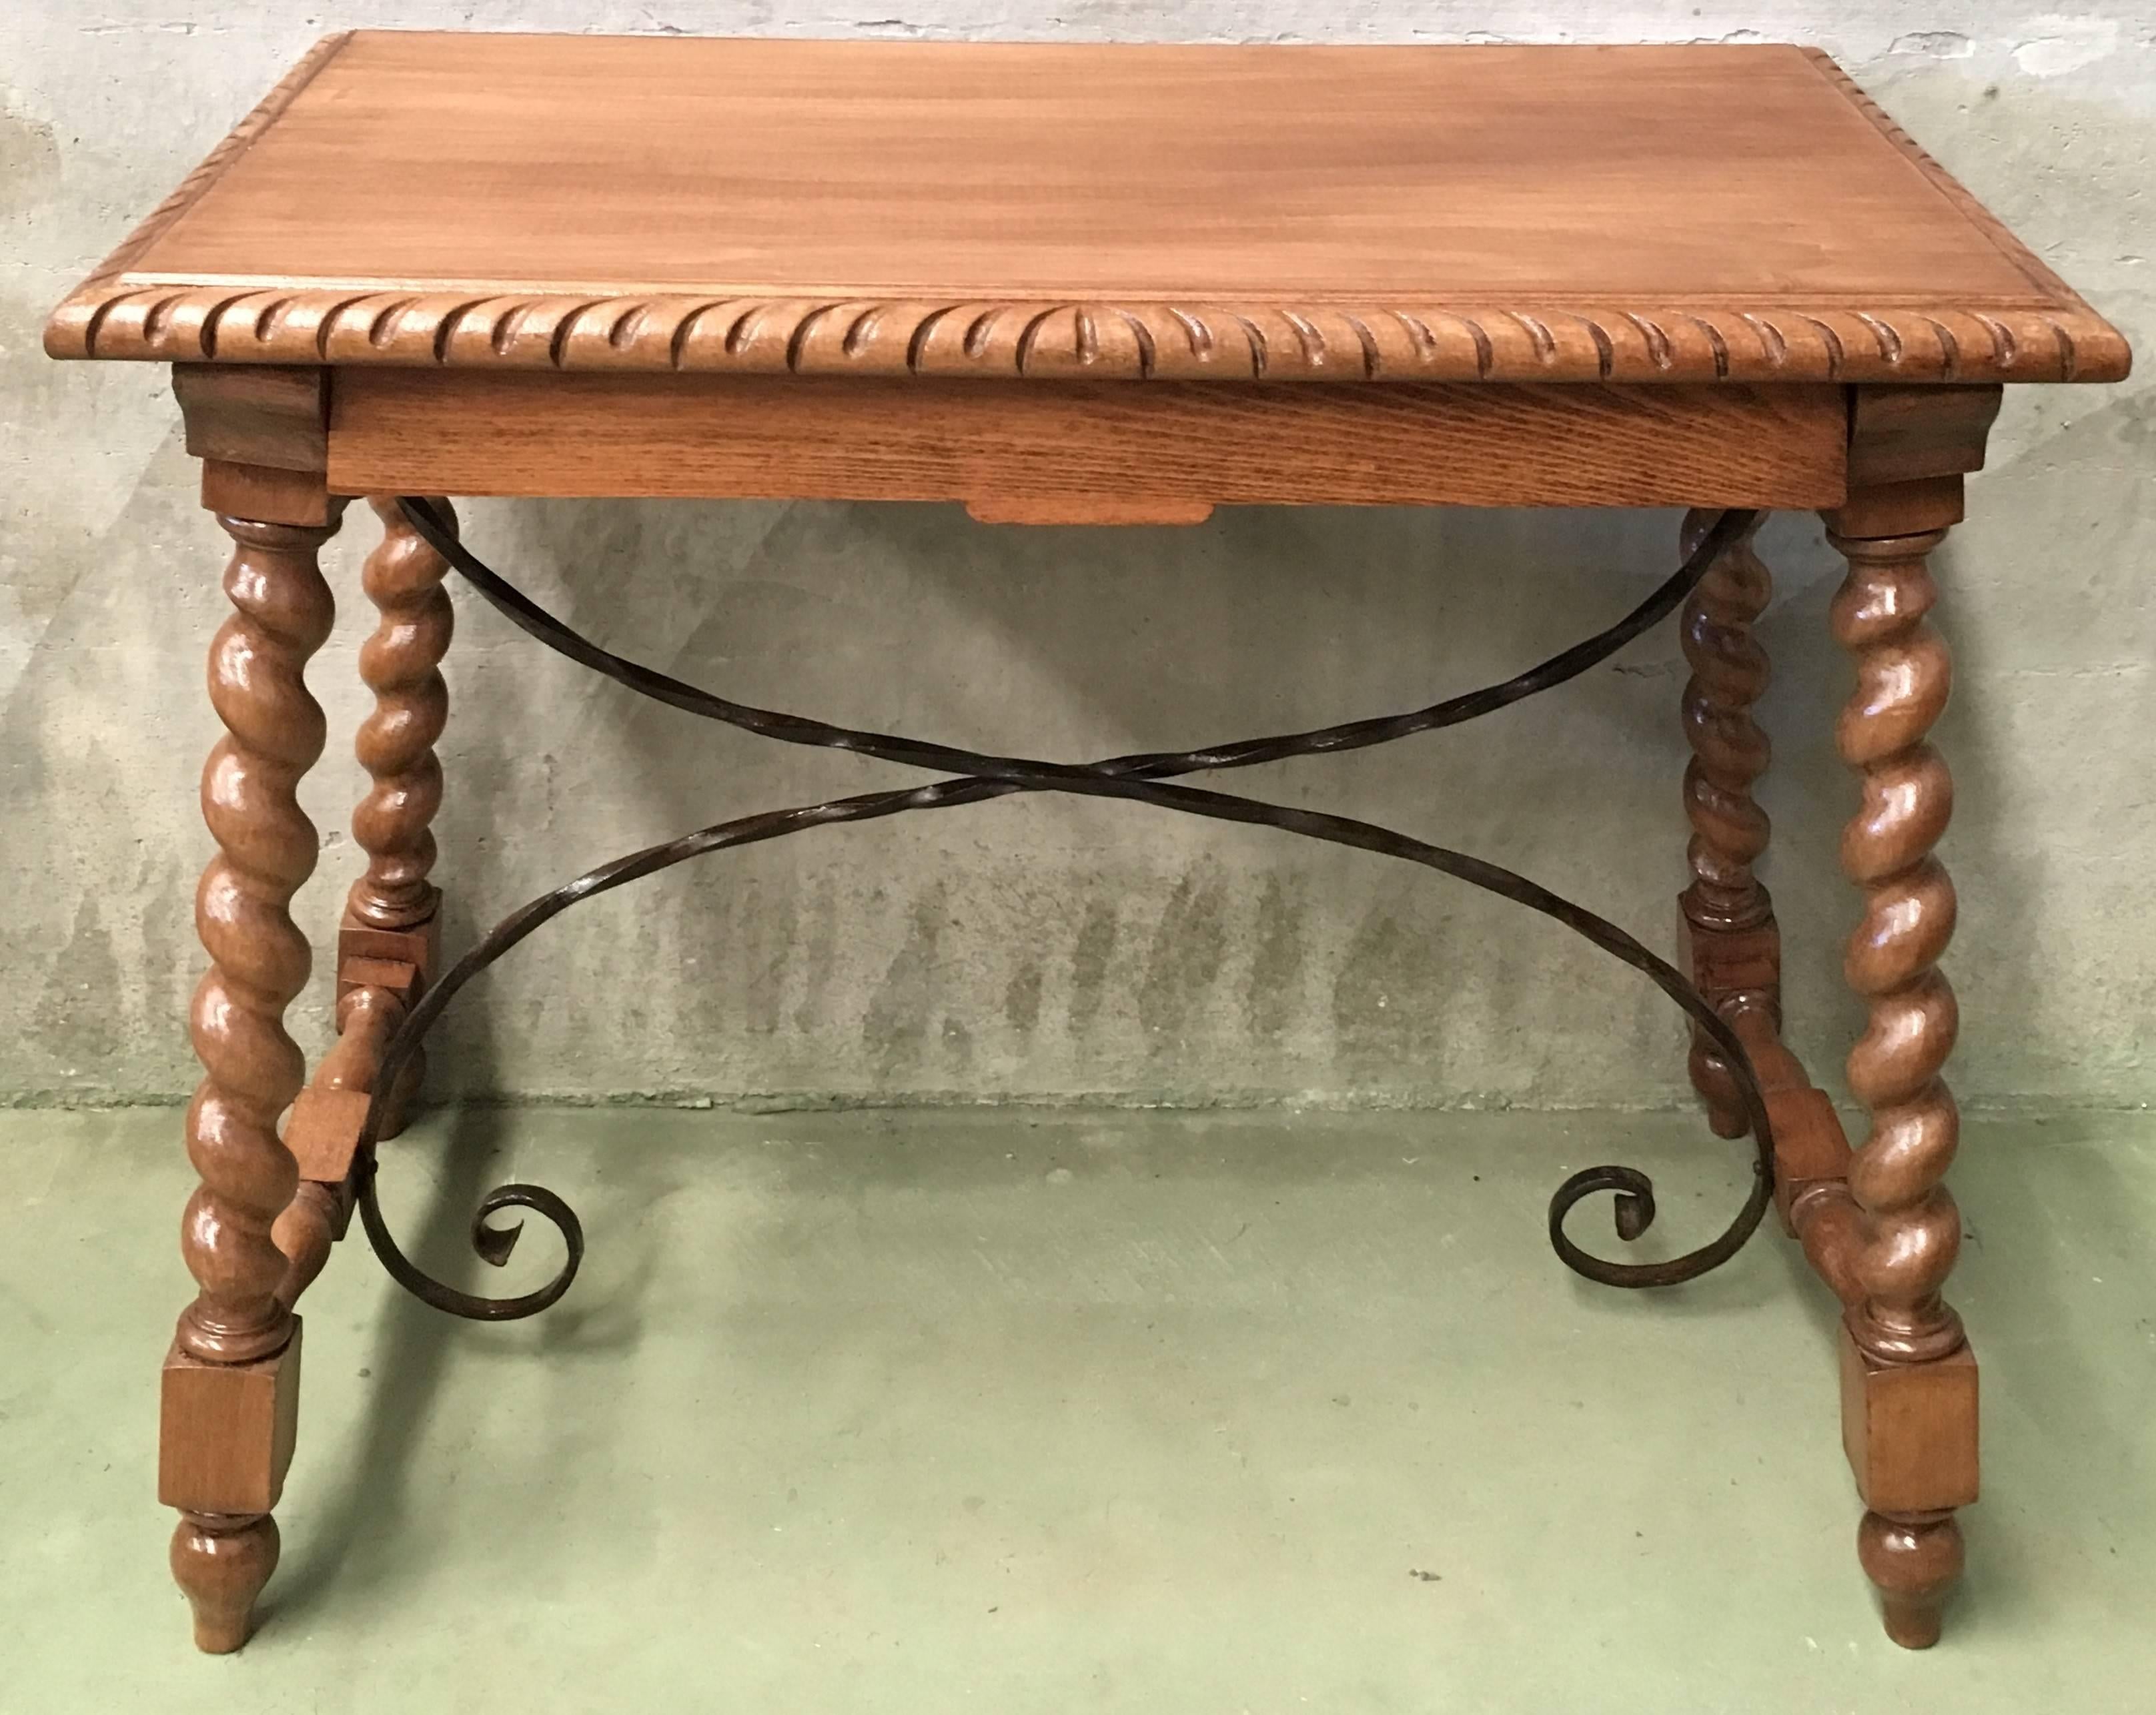 19th Spanish farm table with iron stretchers, hand carved top and drawer.

An unusual form with nice shiny patina. Nice size for a side or end table, or as a lamp table. Graceful carved supports with a shaped edge on the top. The single drawer in